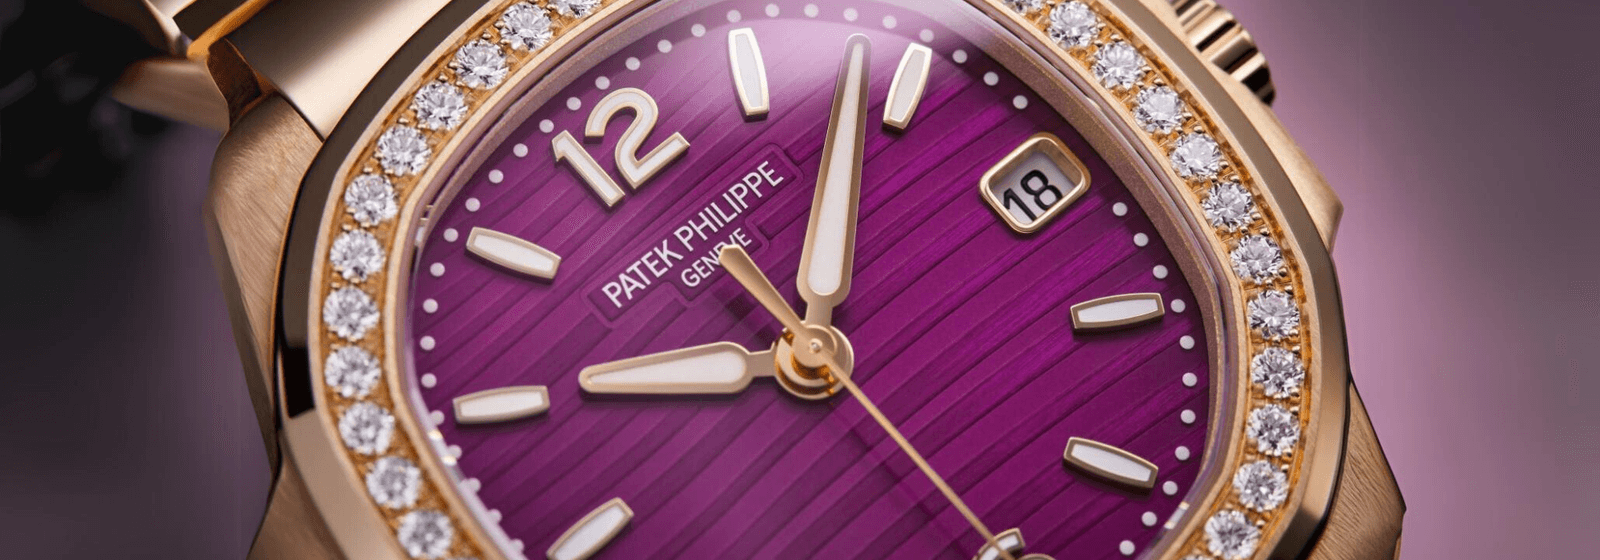 Patek Philippe Launches The First Aquanaut Luce Minute Repeater For Women Alongside Stunning Gem-Set Nautilus Models